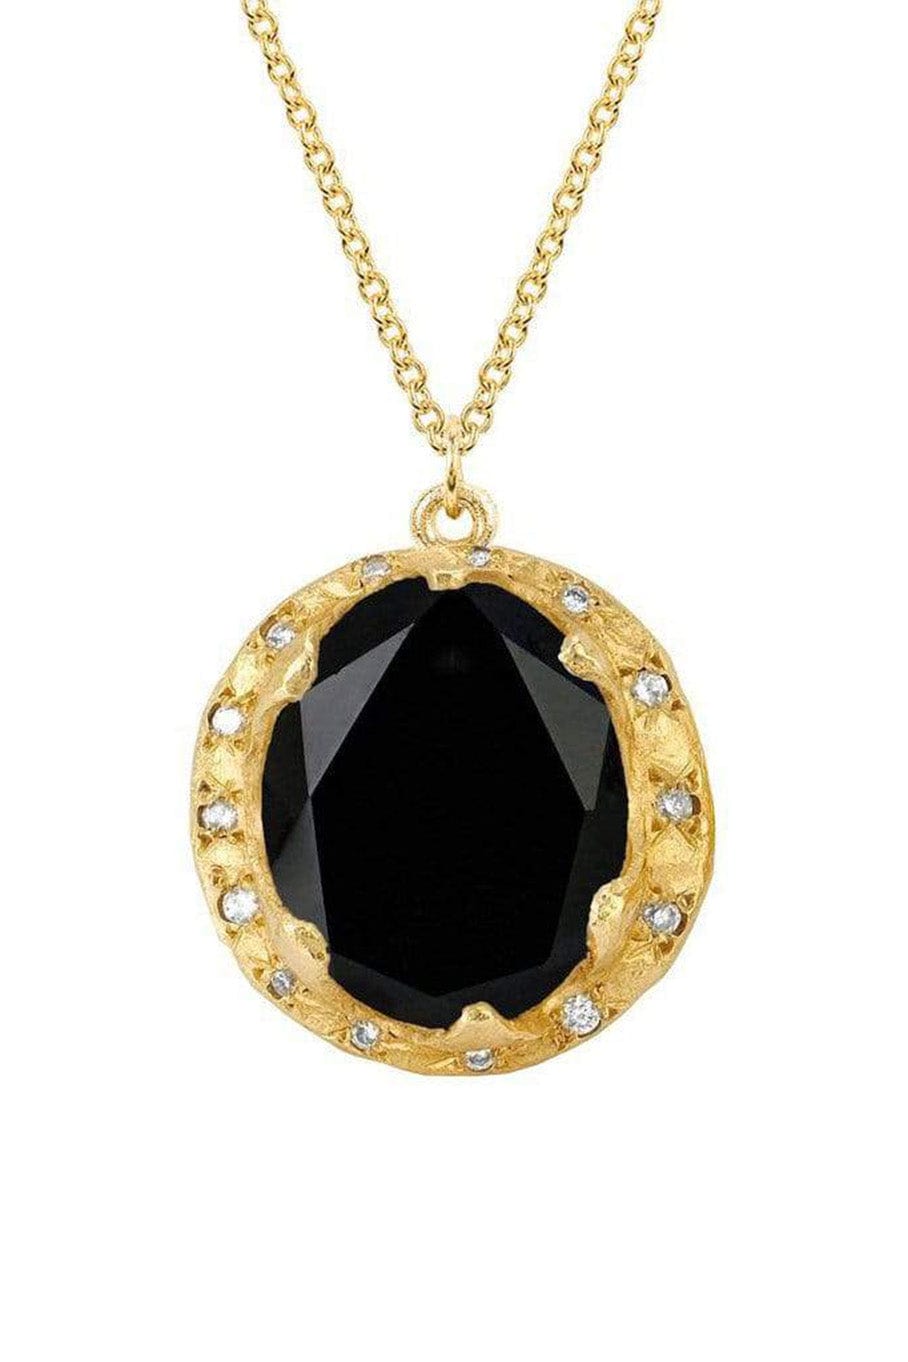 LOGAN HOLLOWELL-Queen Oval Onyx Diamond Necklace-YELLOW GOLD